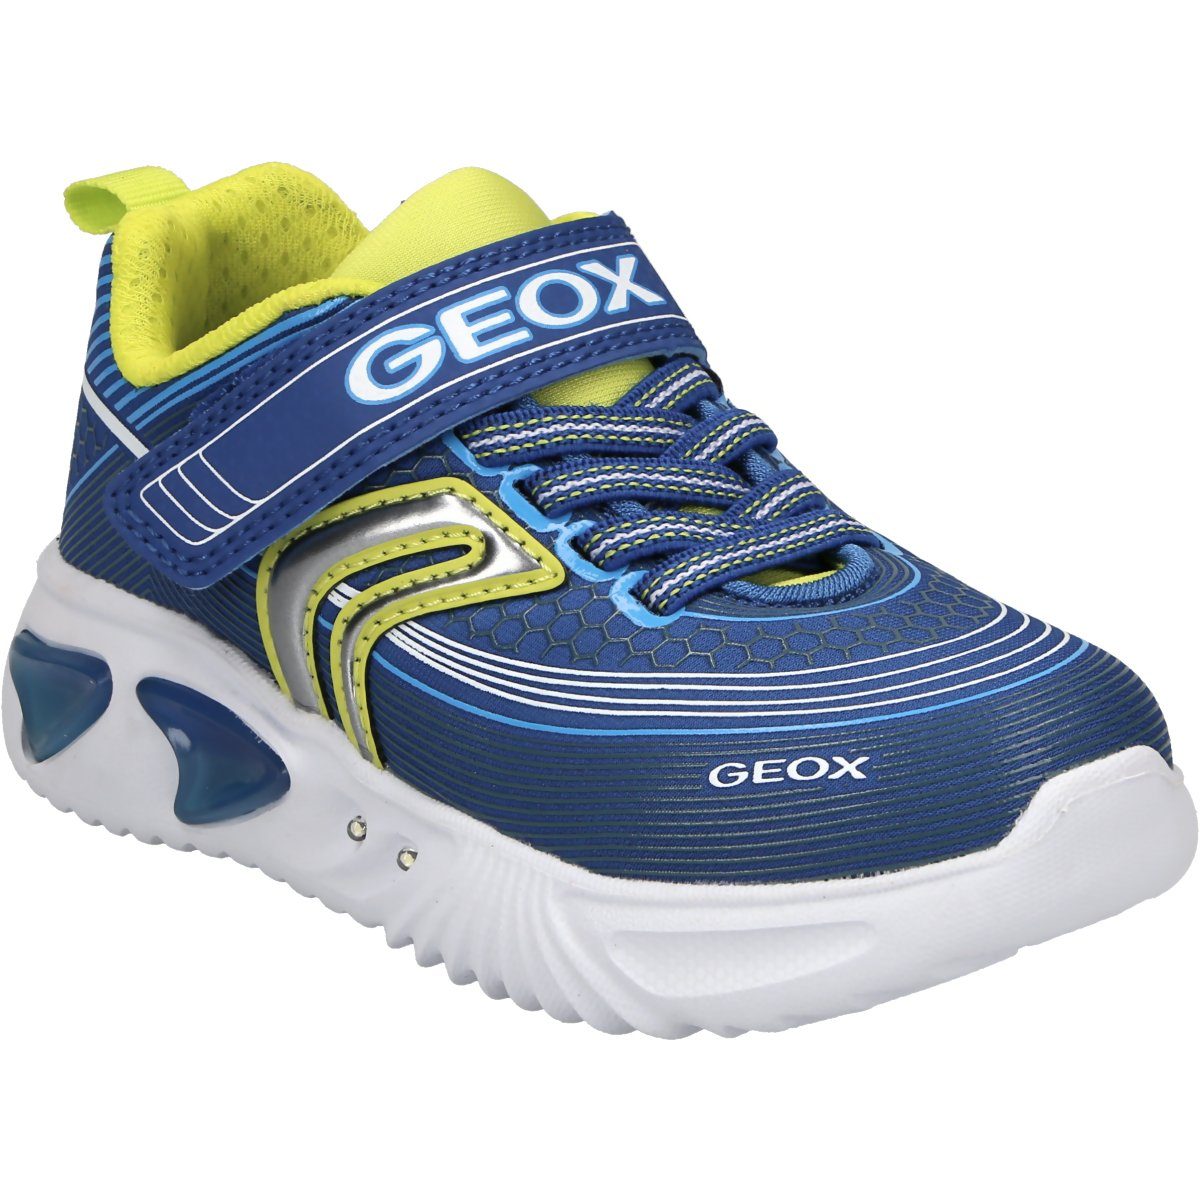 Sneaker ASSISTER Geox ROYAL/LIME